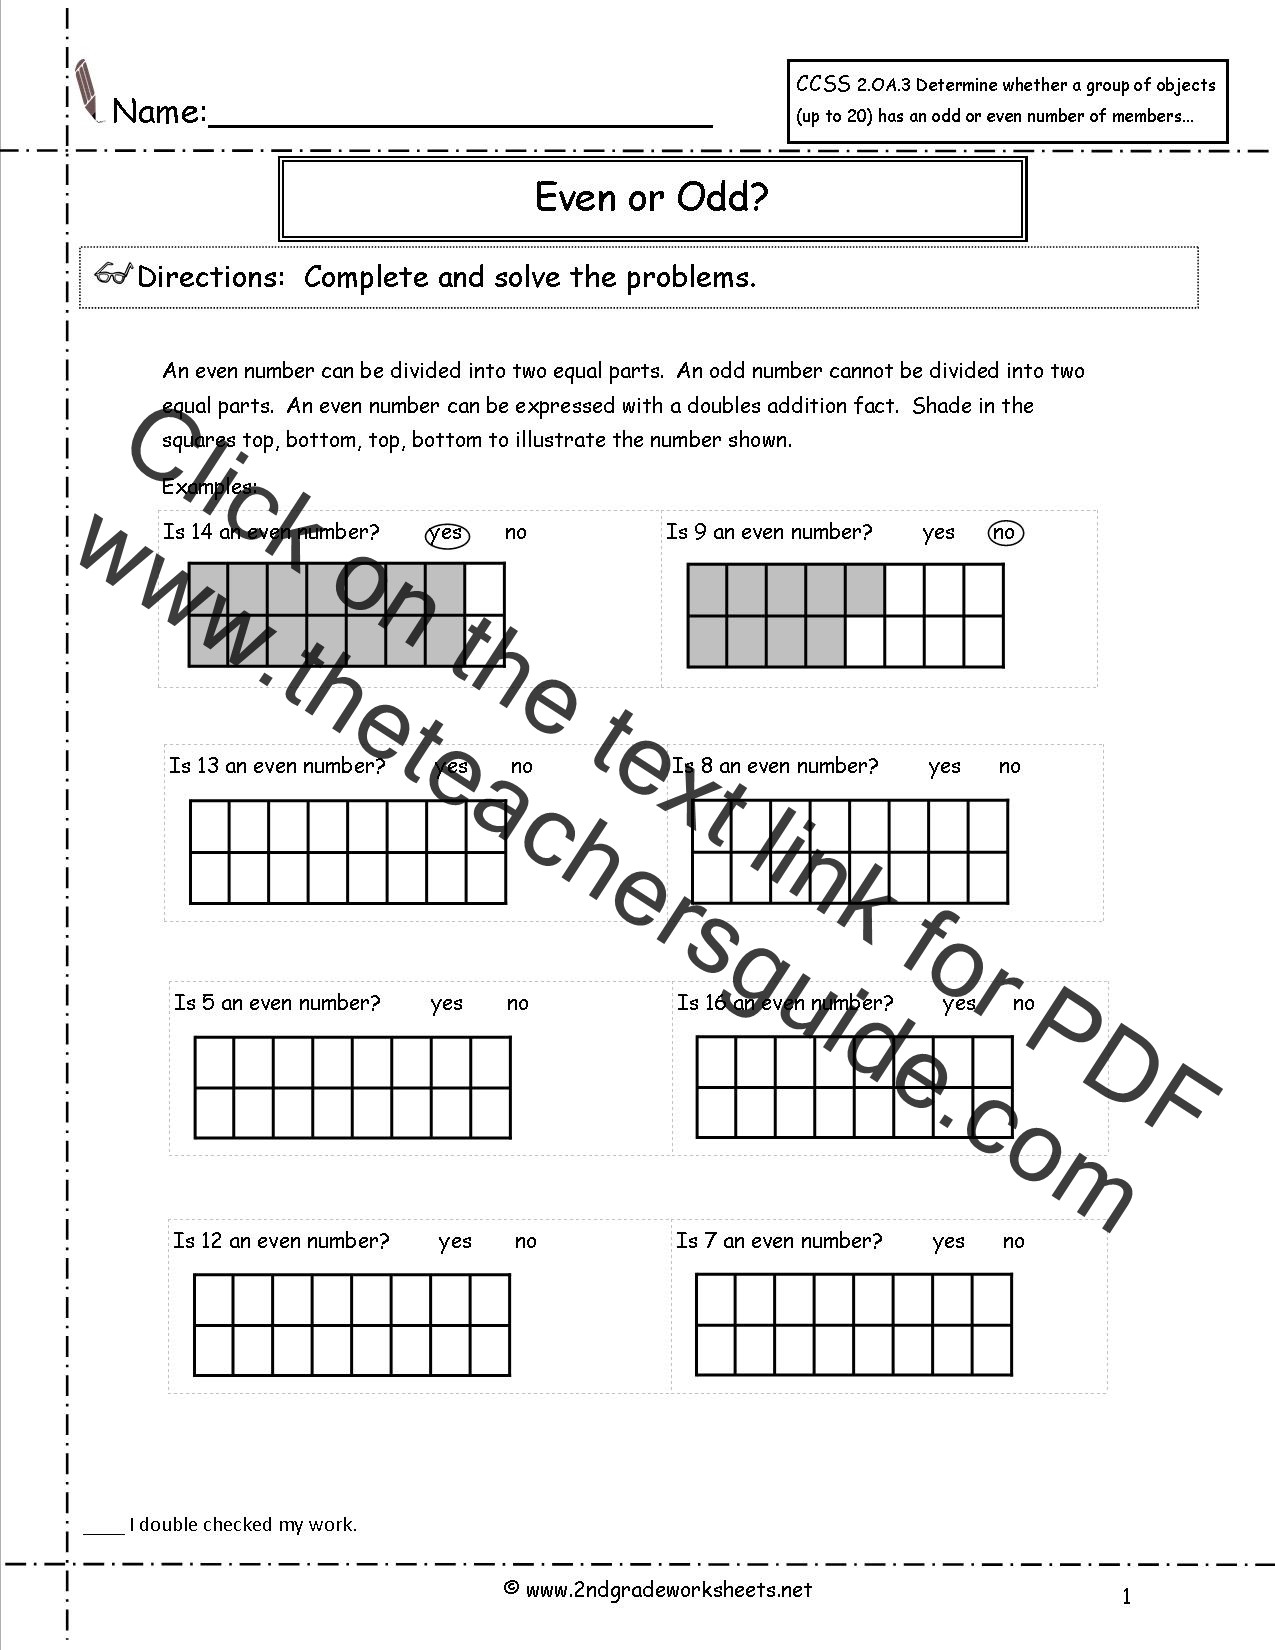 Composing and Decomposing Numbers Worksheet 2nd Grade Math Mon Core State Standards Worksheets